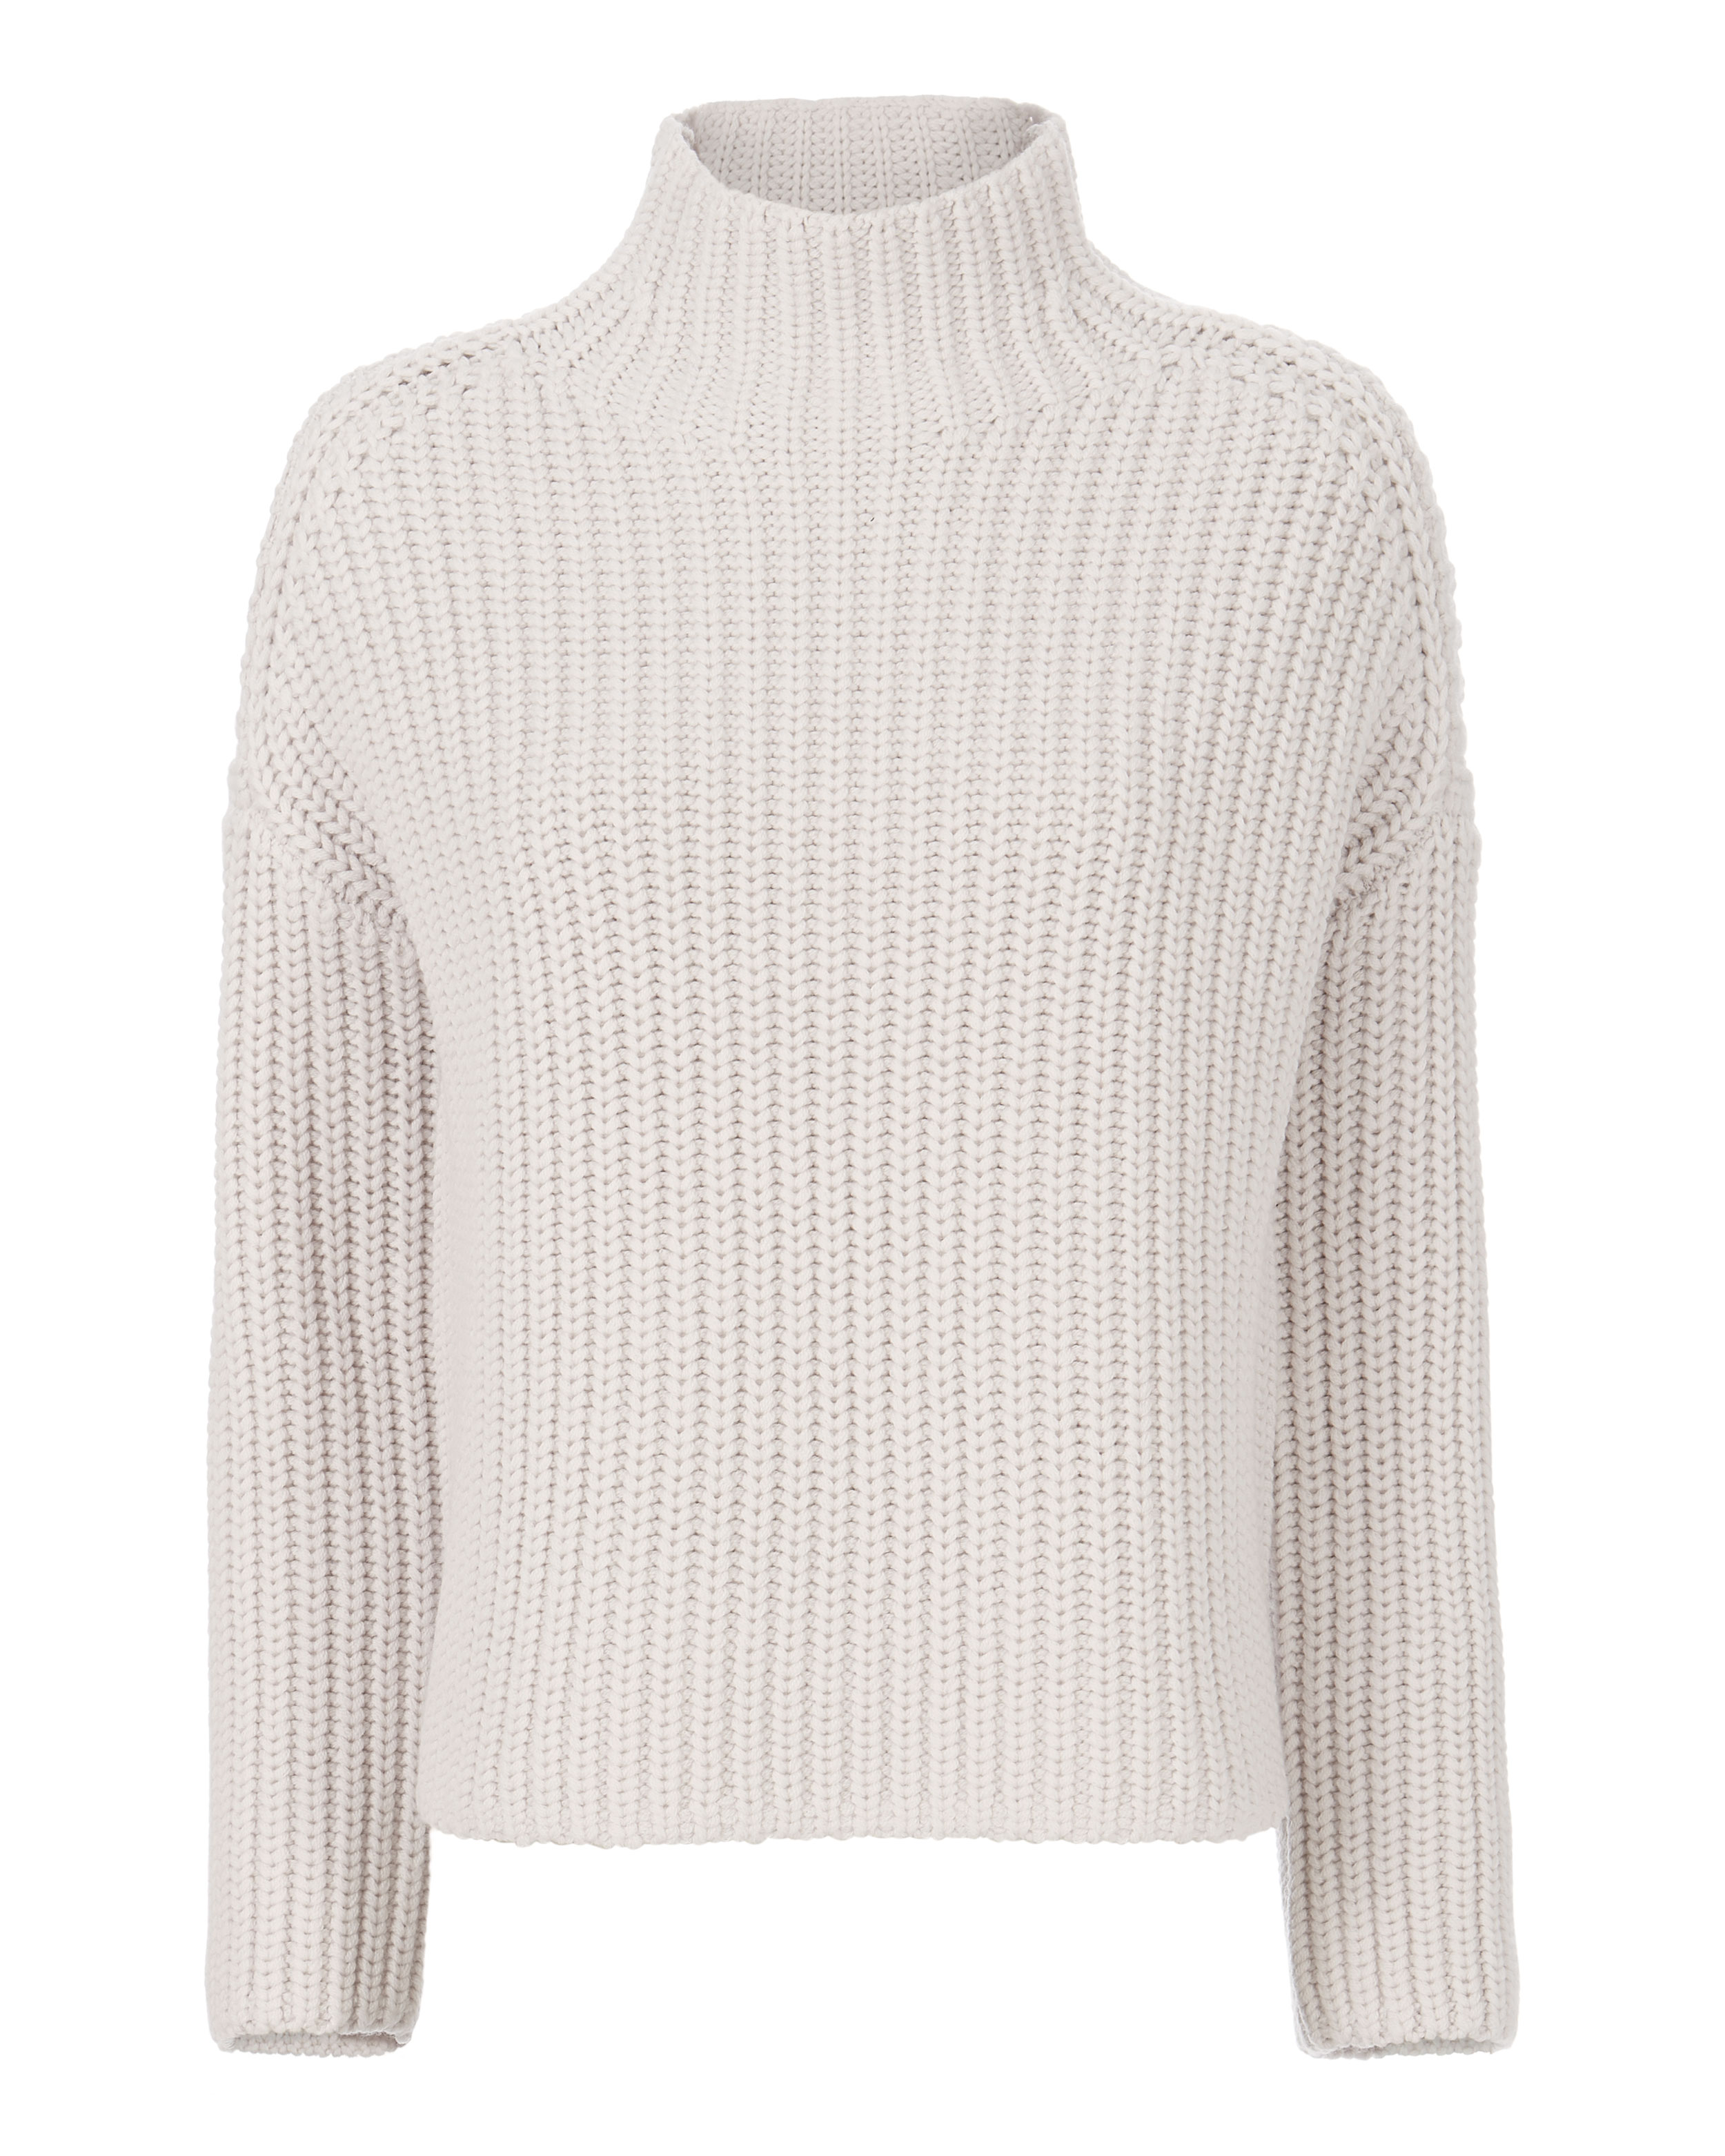 Armellyn Ribbed Turtleneck Sweater